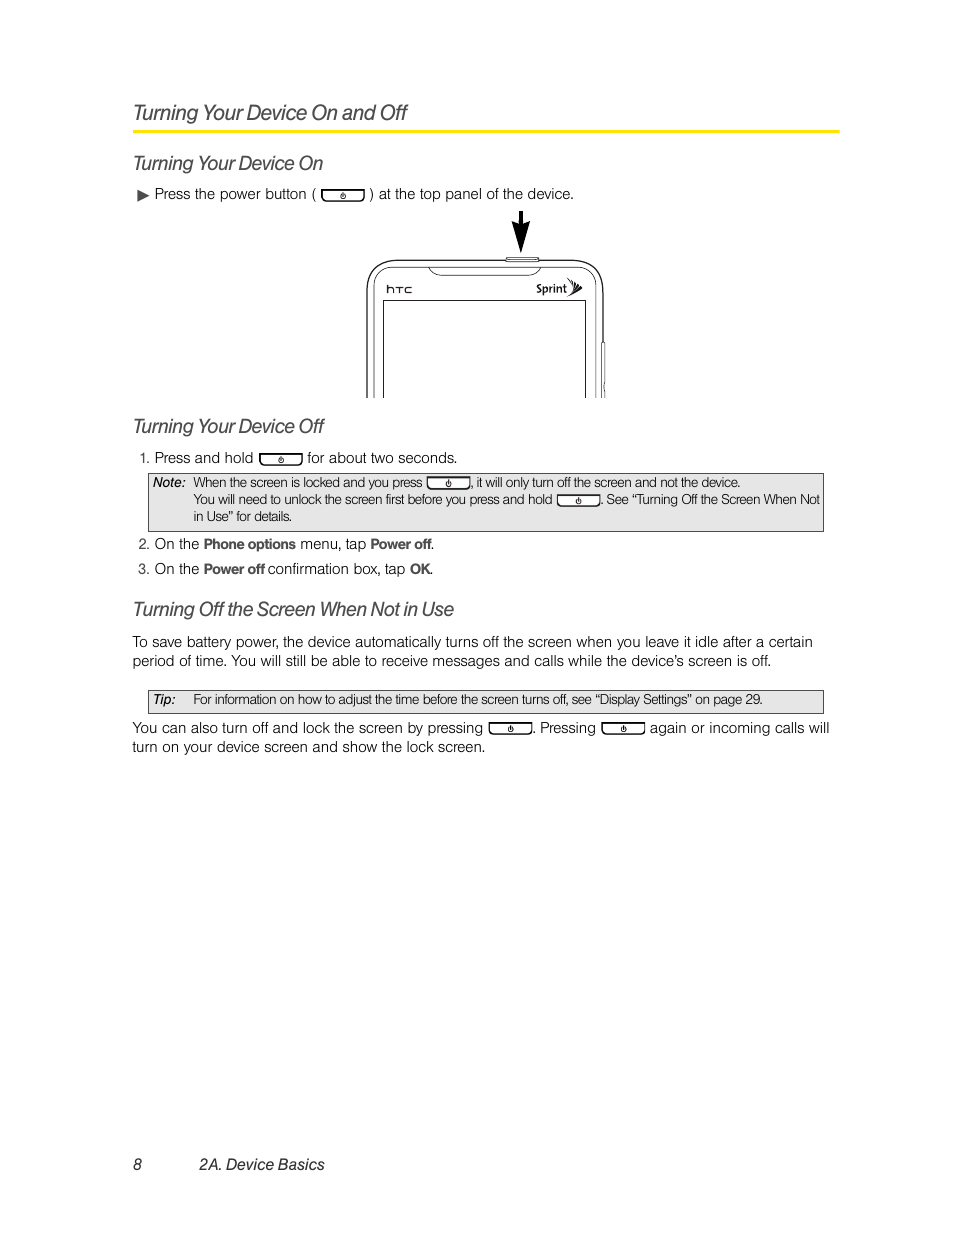 Turning your device on and off, Turning your device on, Turning your device off | Turning off the screen when not in use | HTC EVO 4G User Manual | Page 18 / 197